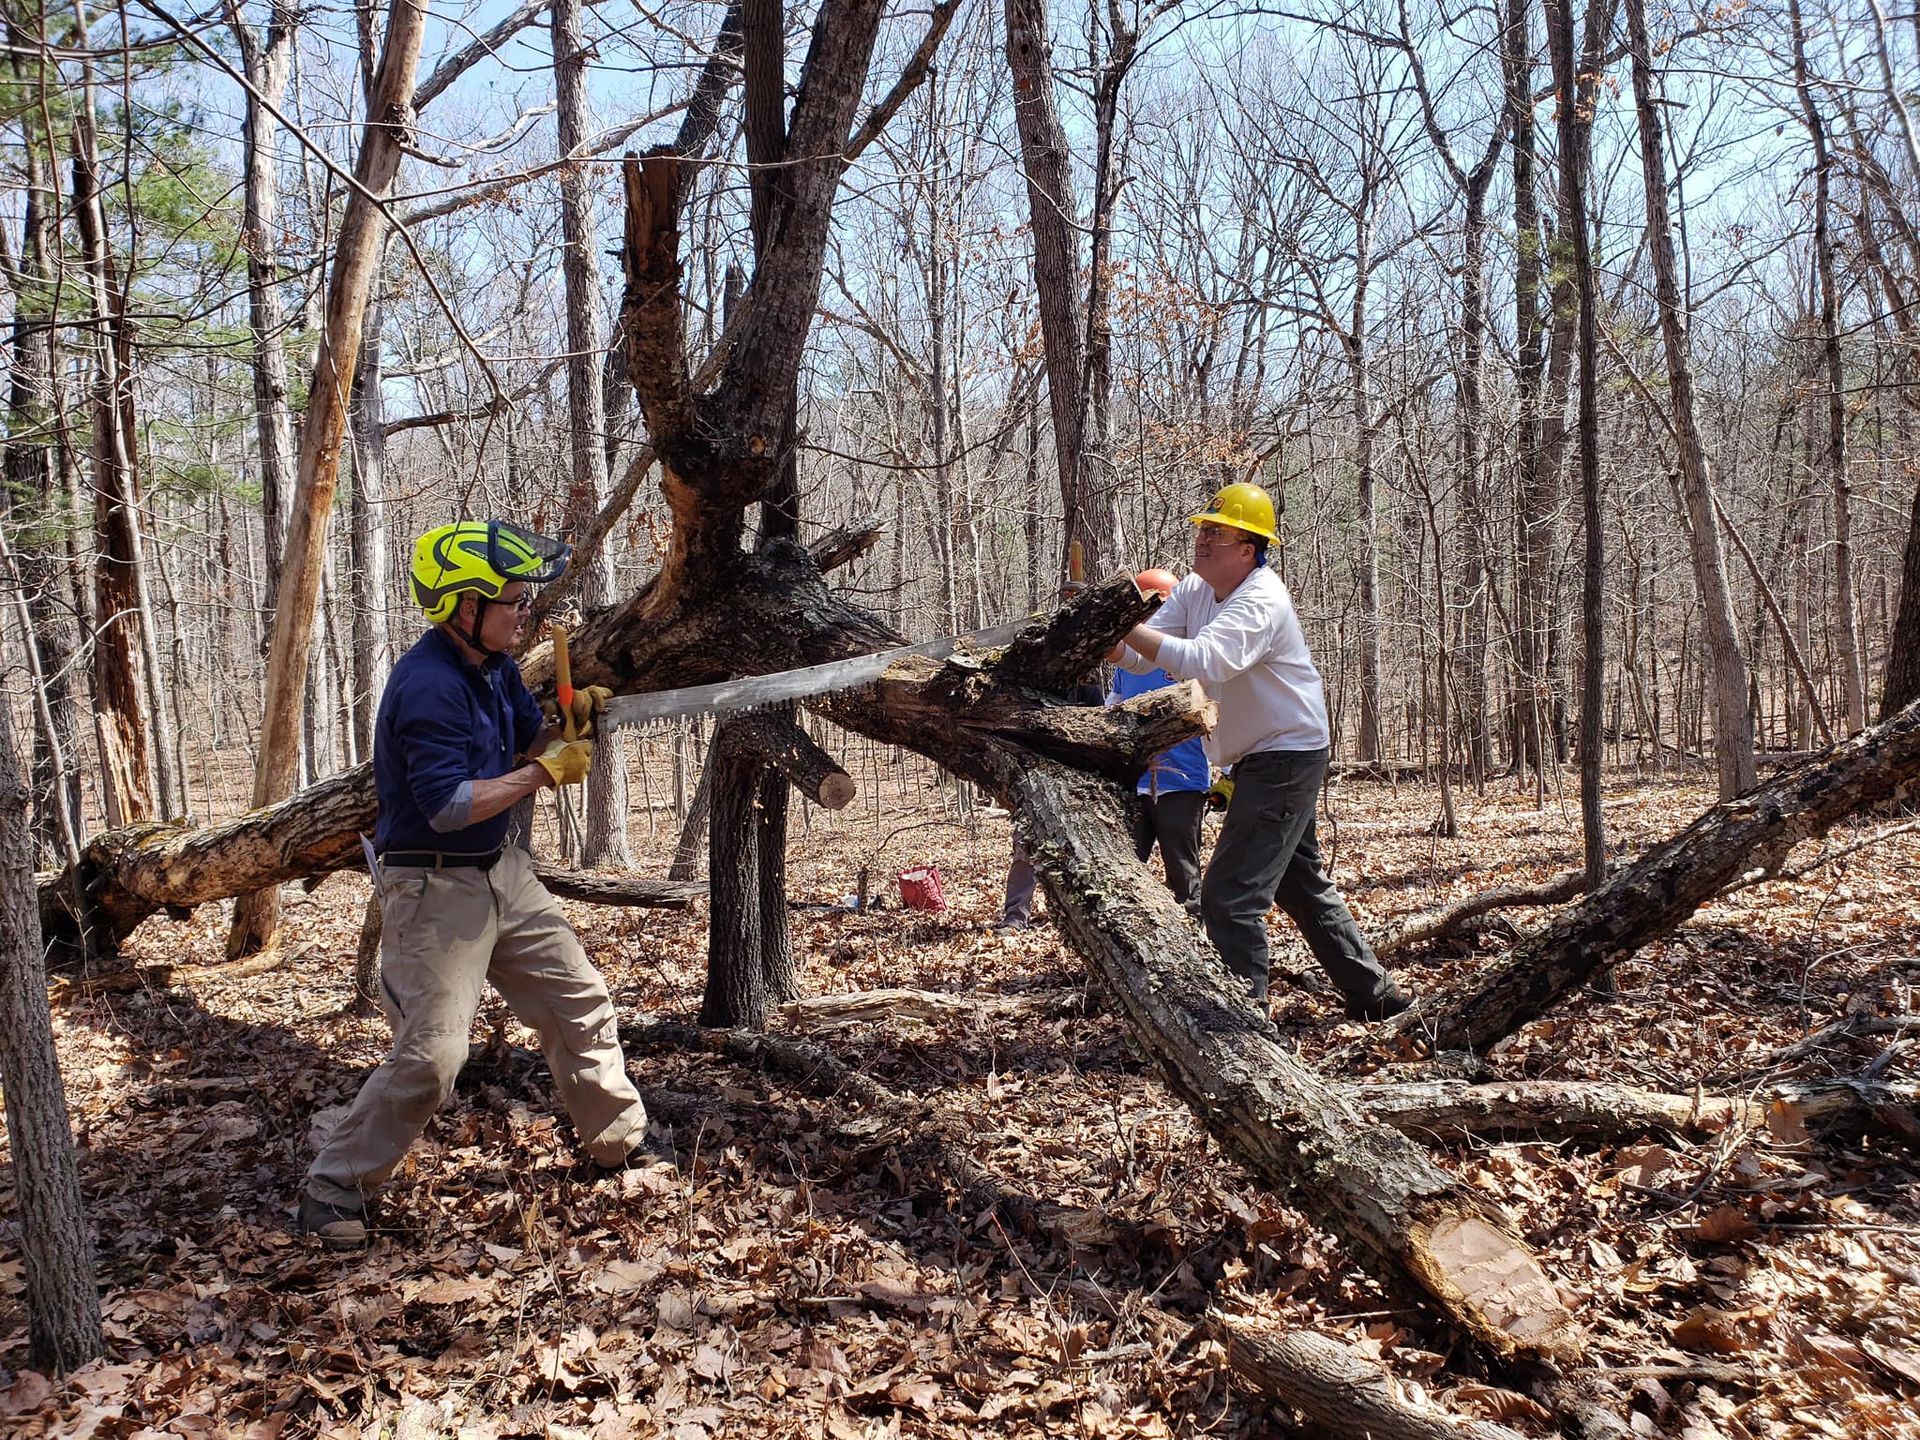 Two PATC volunteers are hand-sawing a fallen tree.